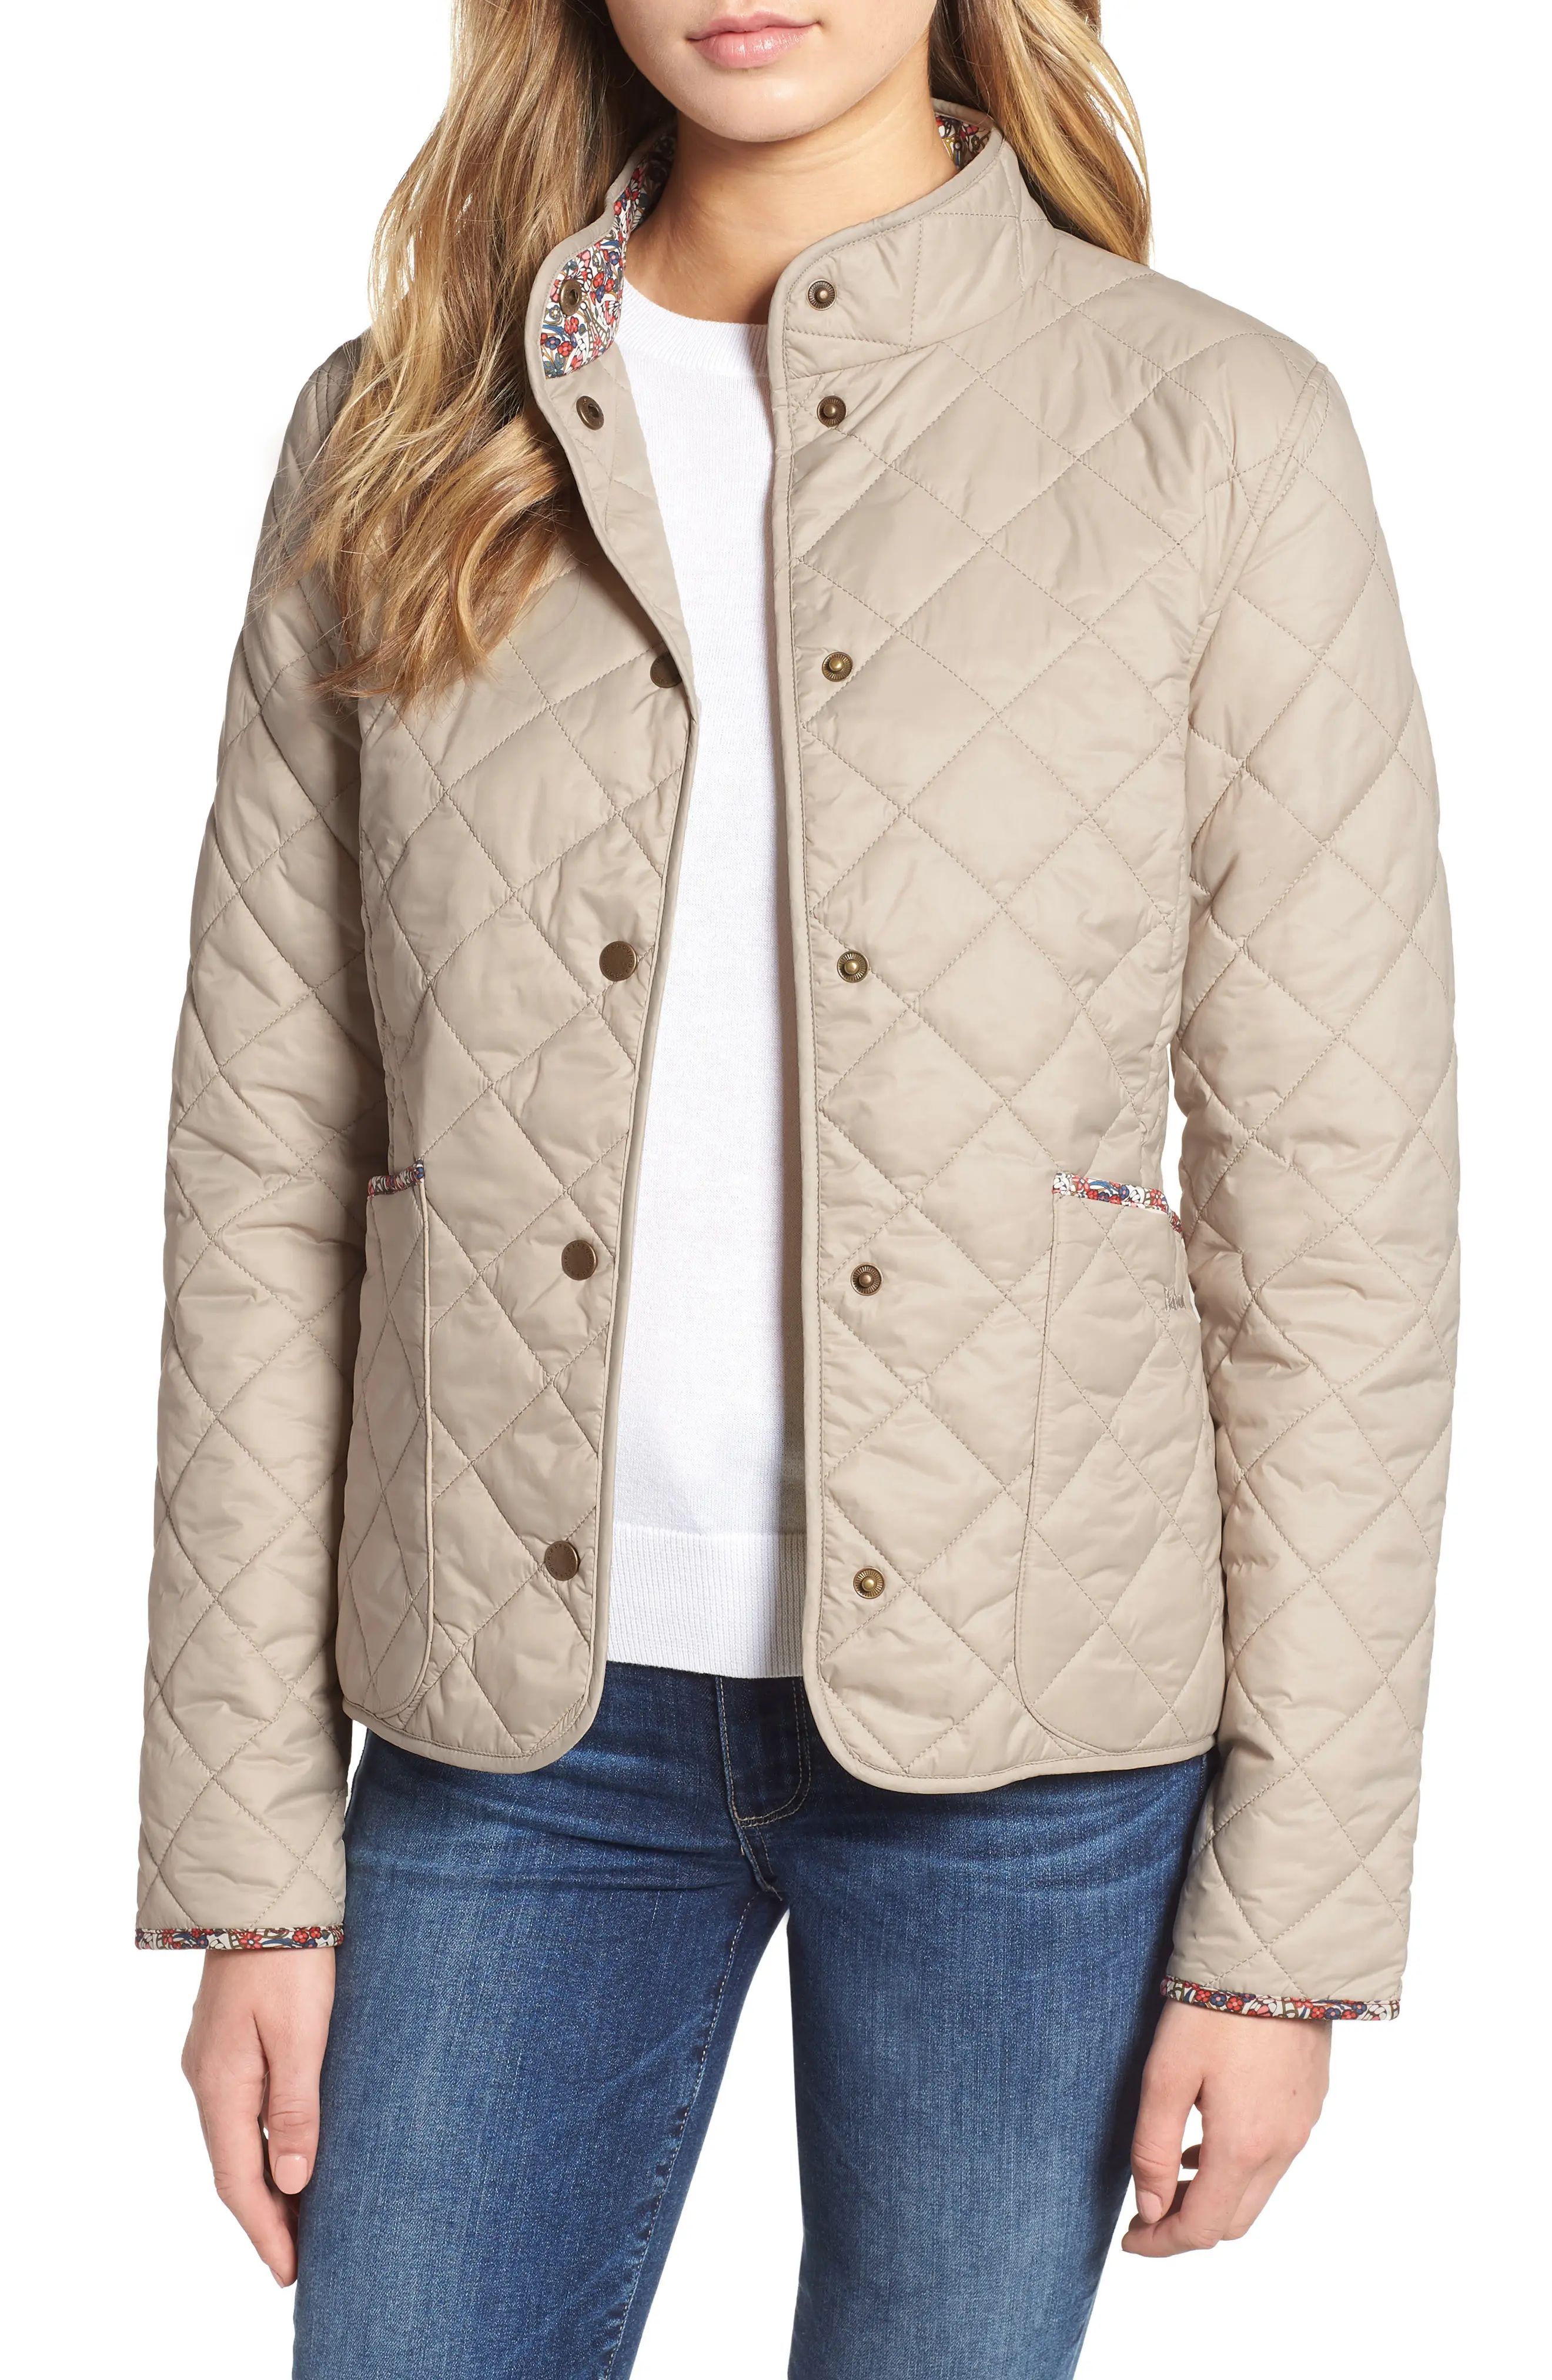 Women's Barbour X Liberty Evelyn Quilted Jacket, Size 10 US / 14 UK - Beige | Nordstrom